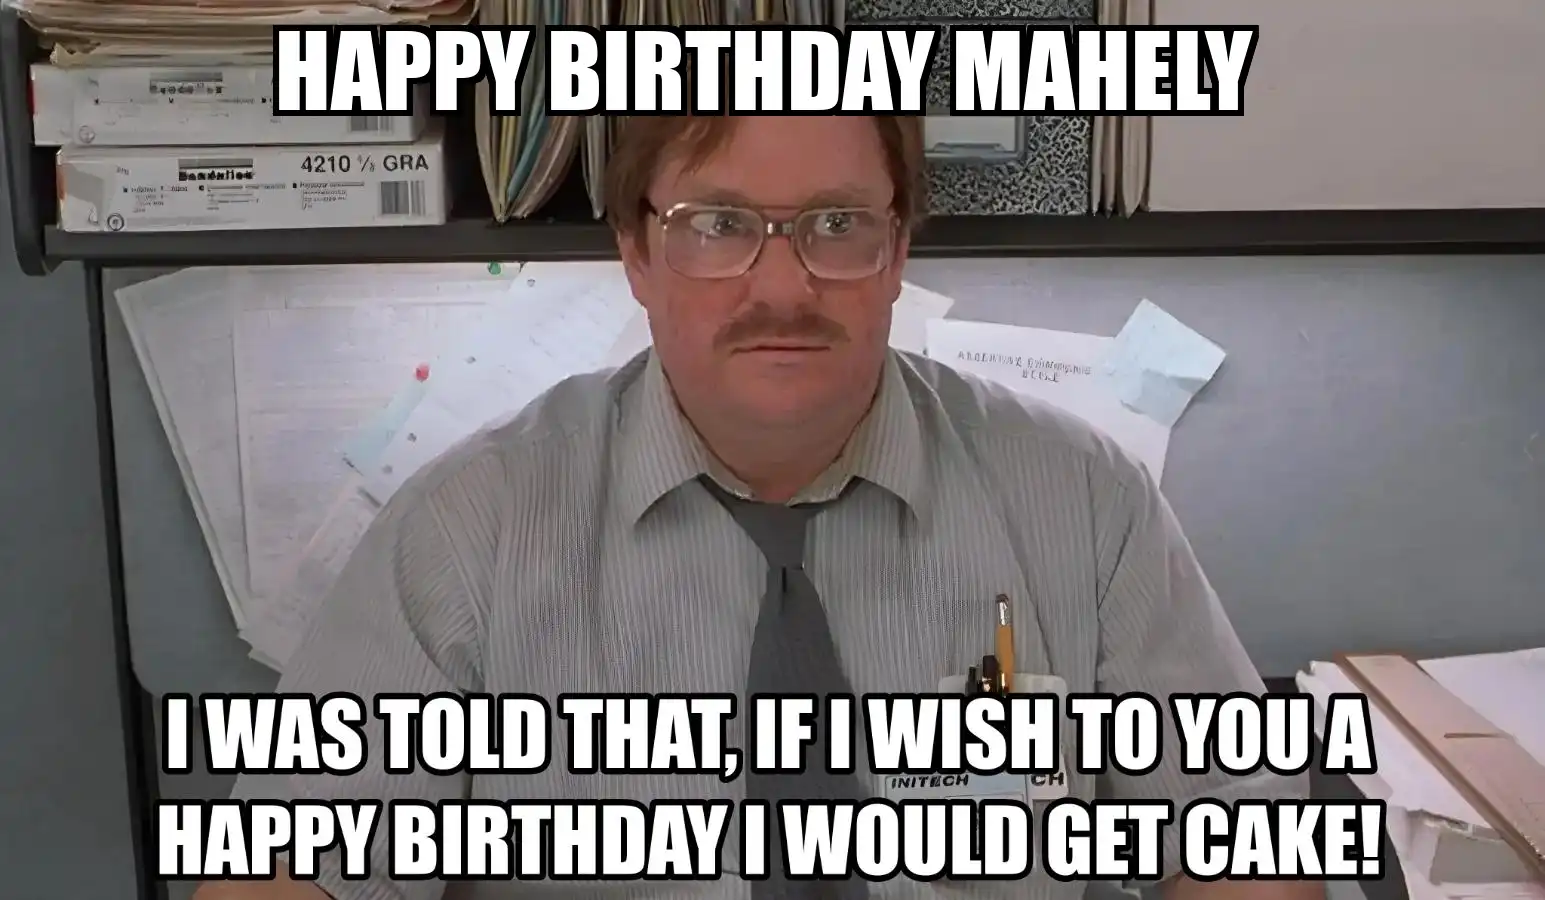 Happy Birthday Mahely I Would Get A Cake Meme